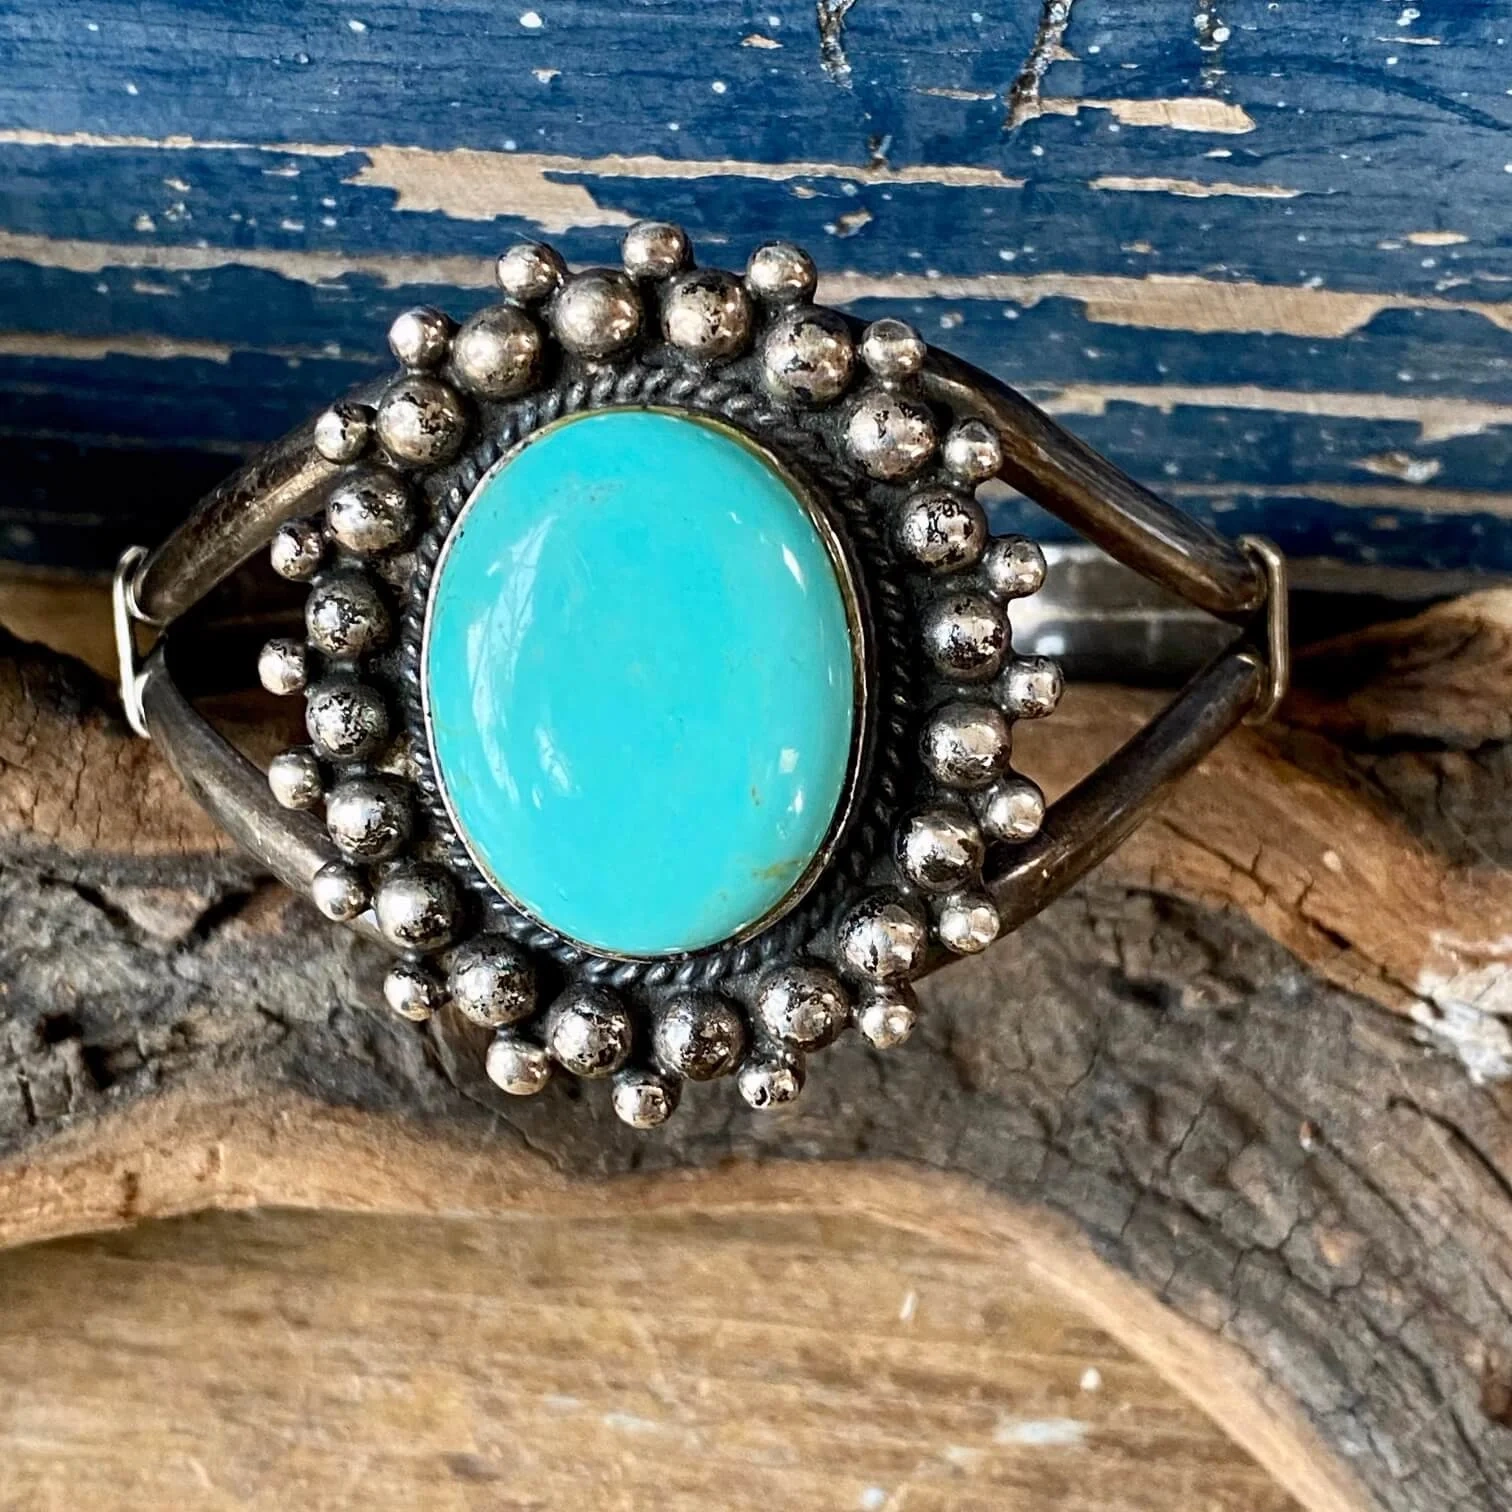 Southwestern Raindrop Bracelet with Perfect Pale Turquoise Sterling